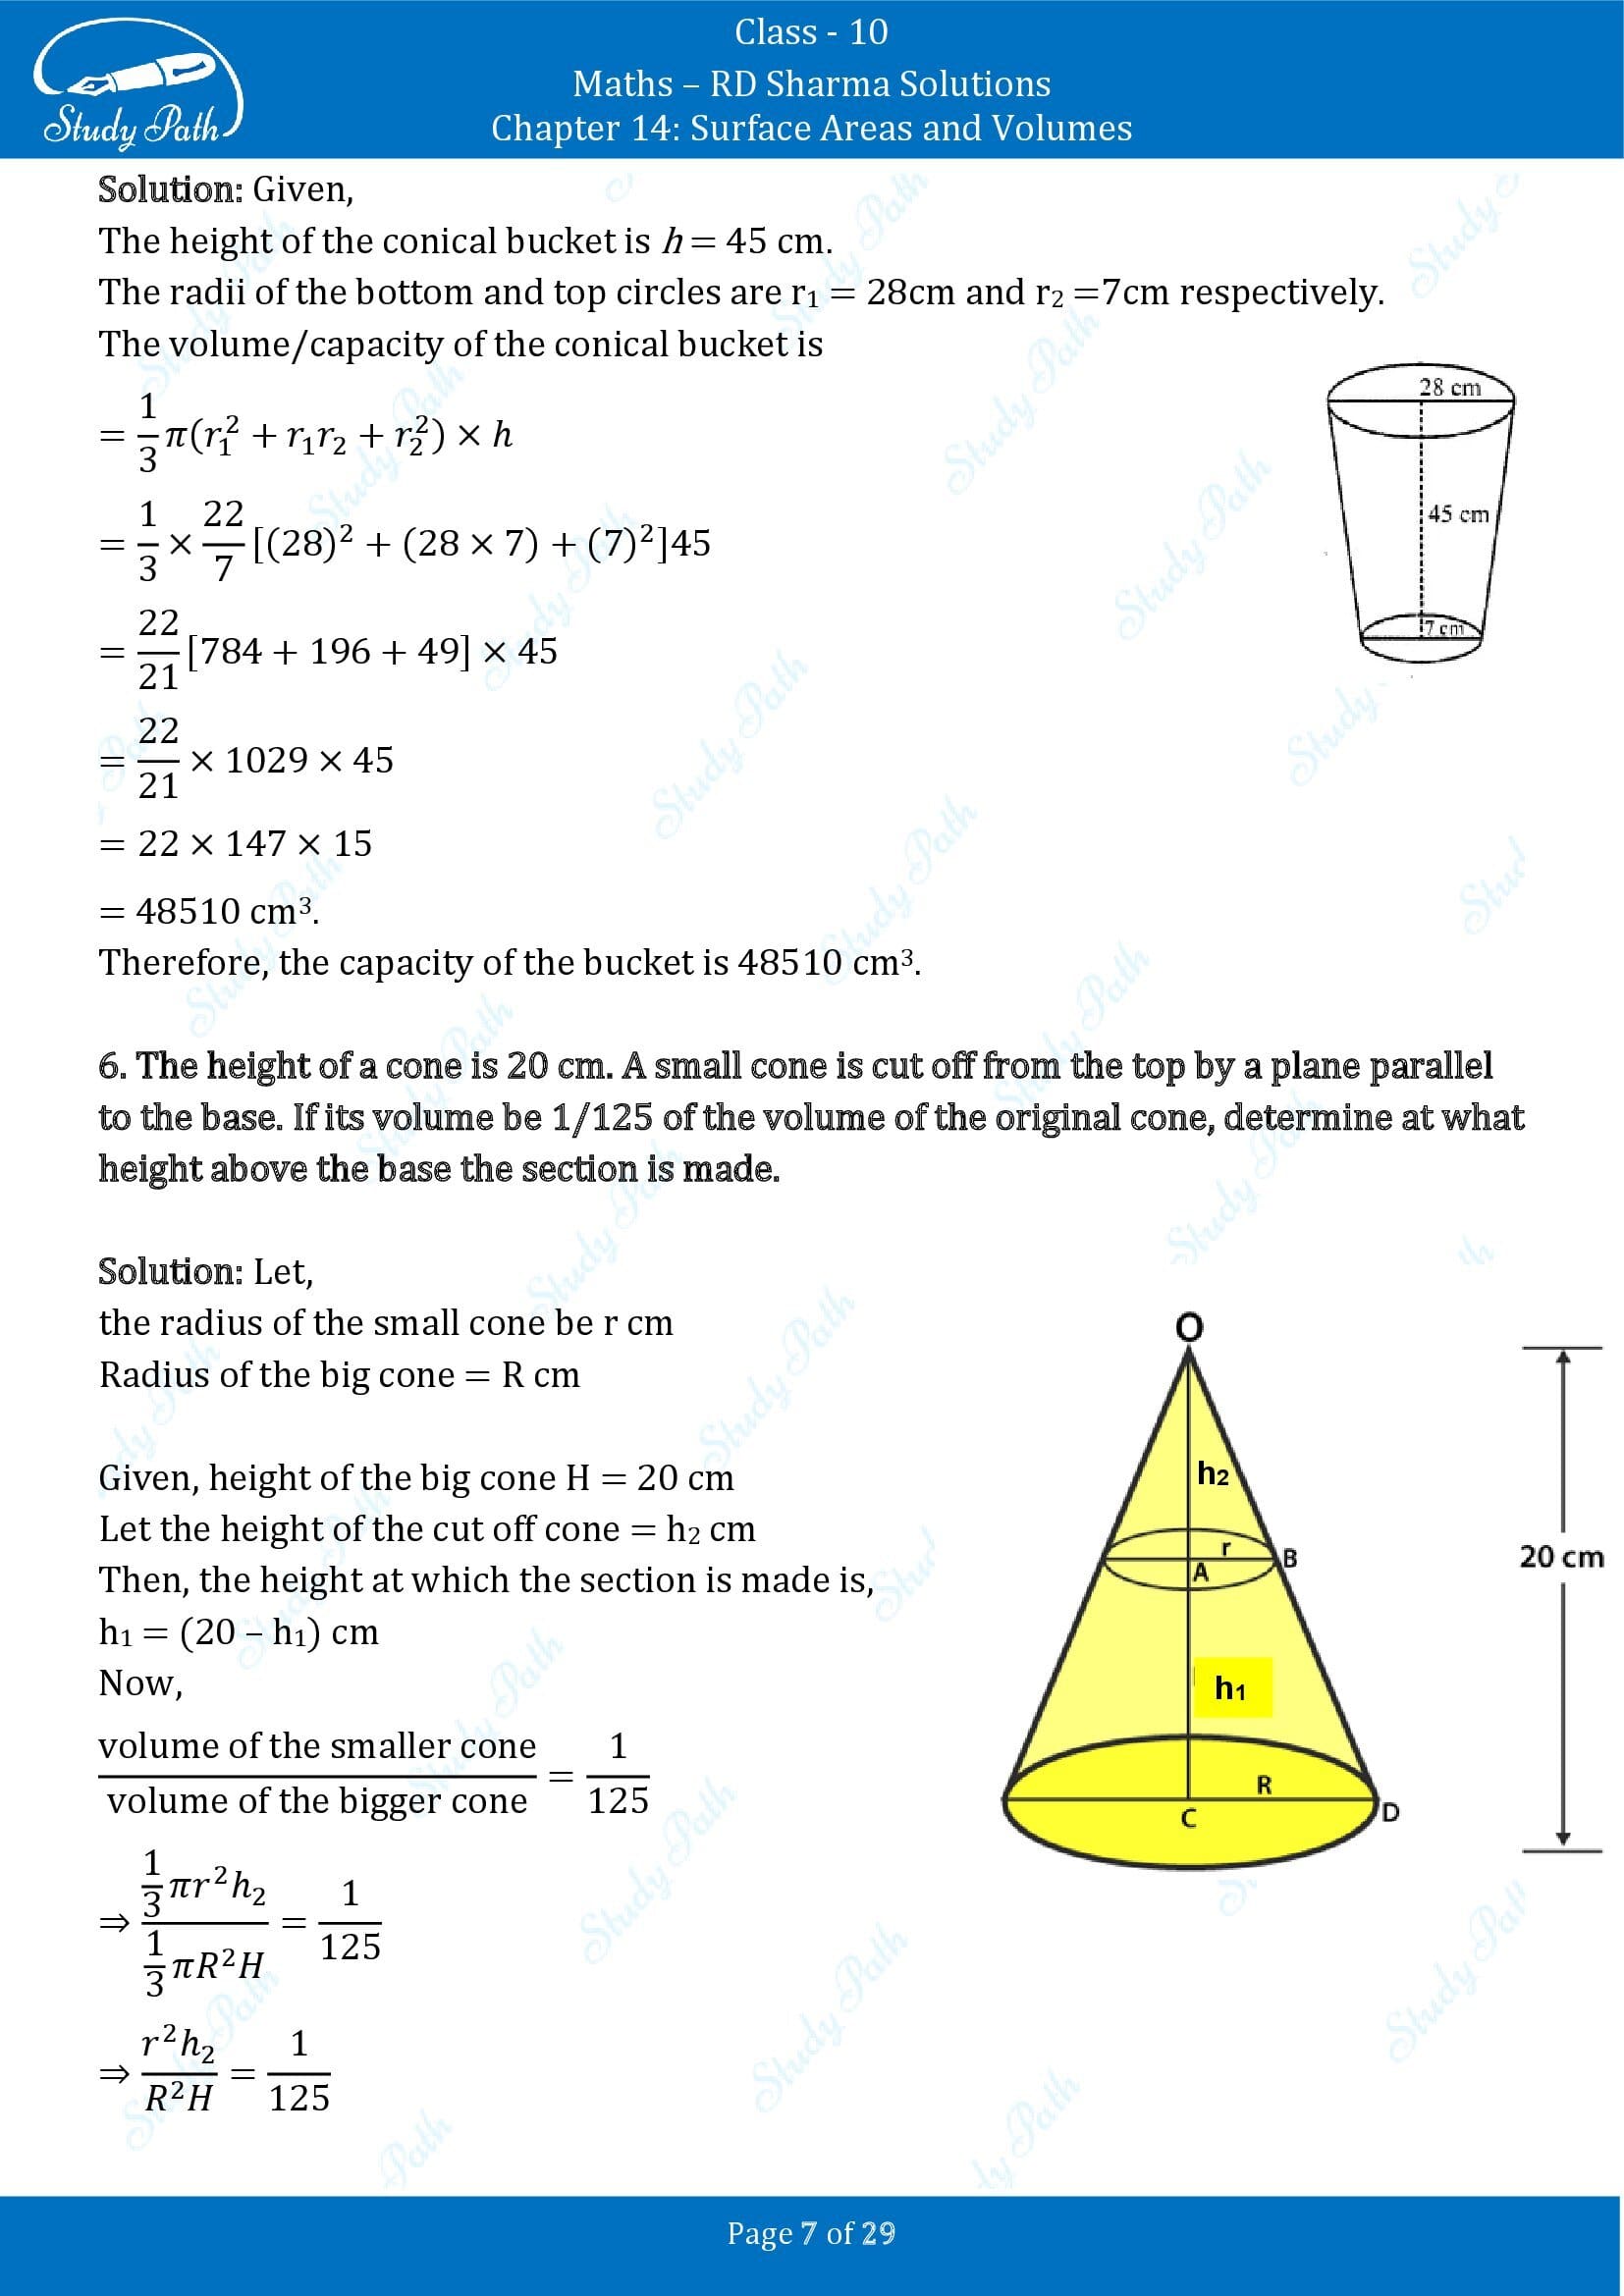 RD Sharma Solutions Class 10 Chapter 14 Surface Areas and Volumes Exercise 14.3 00007